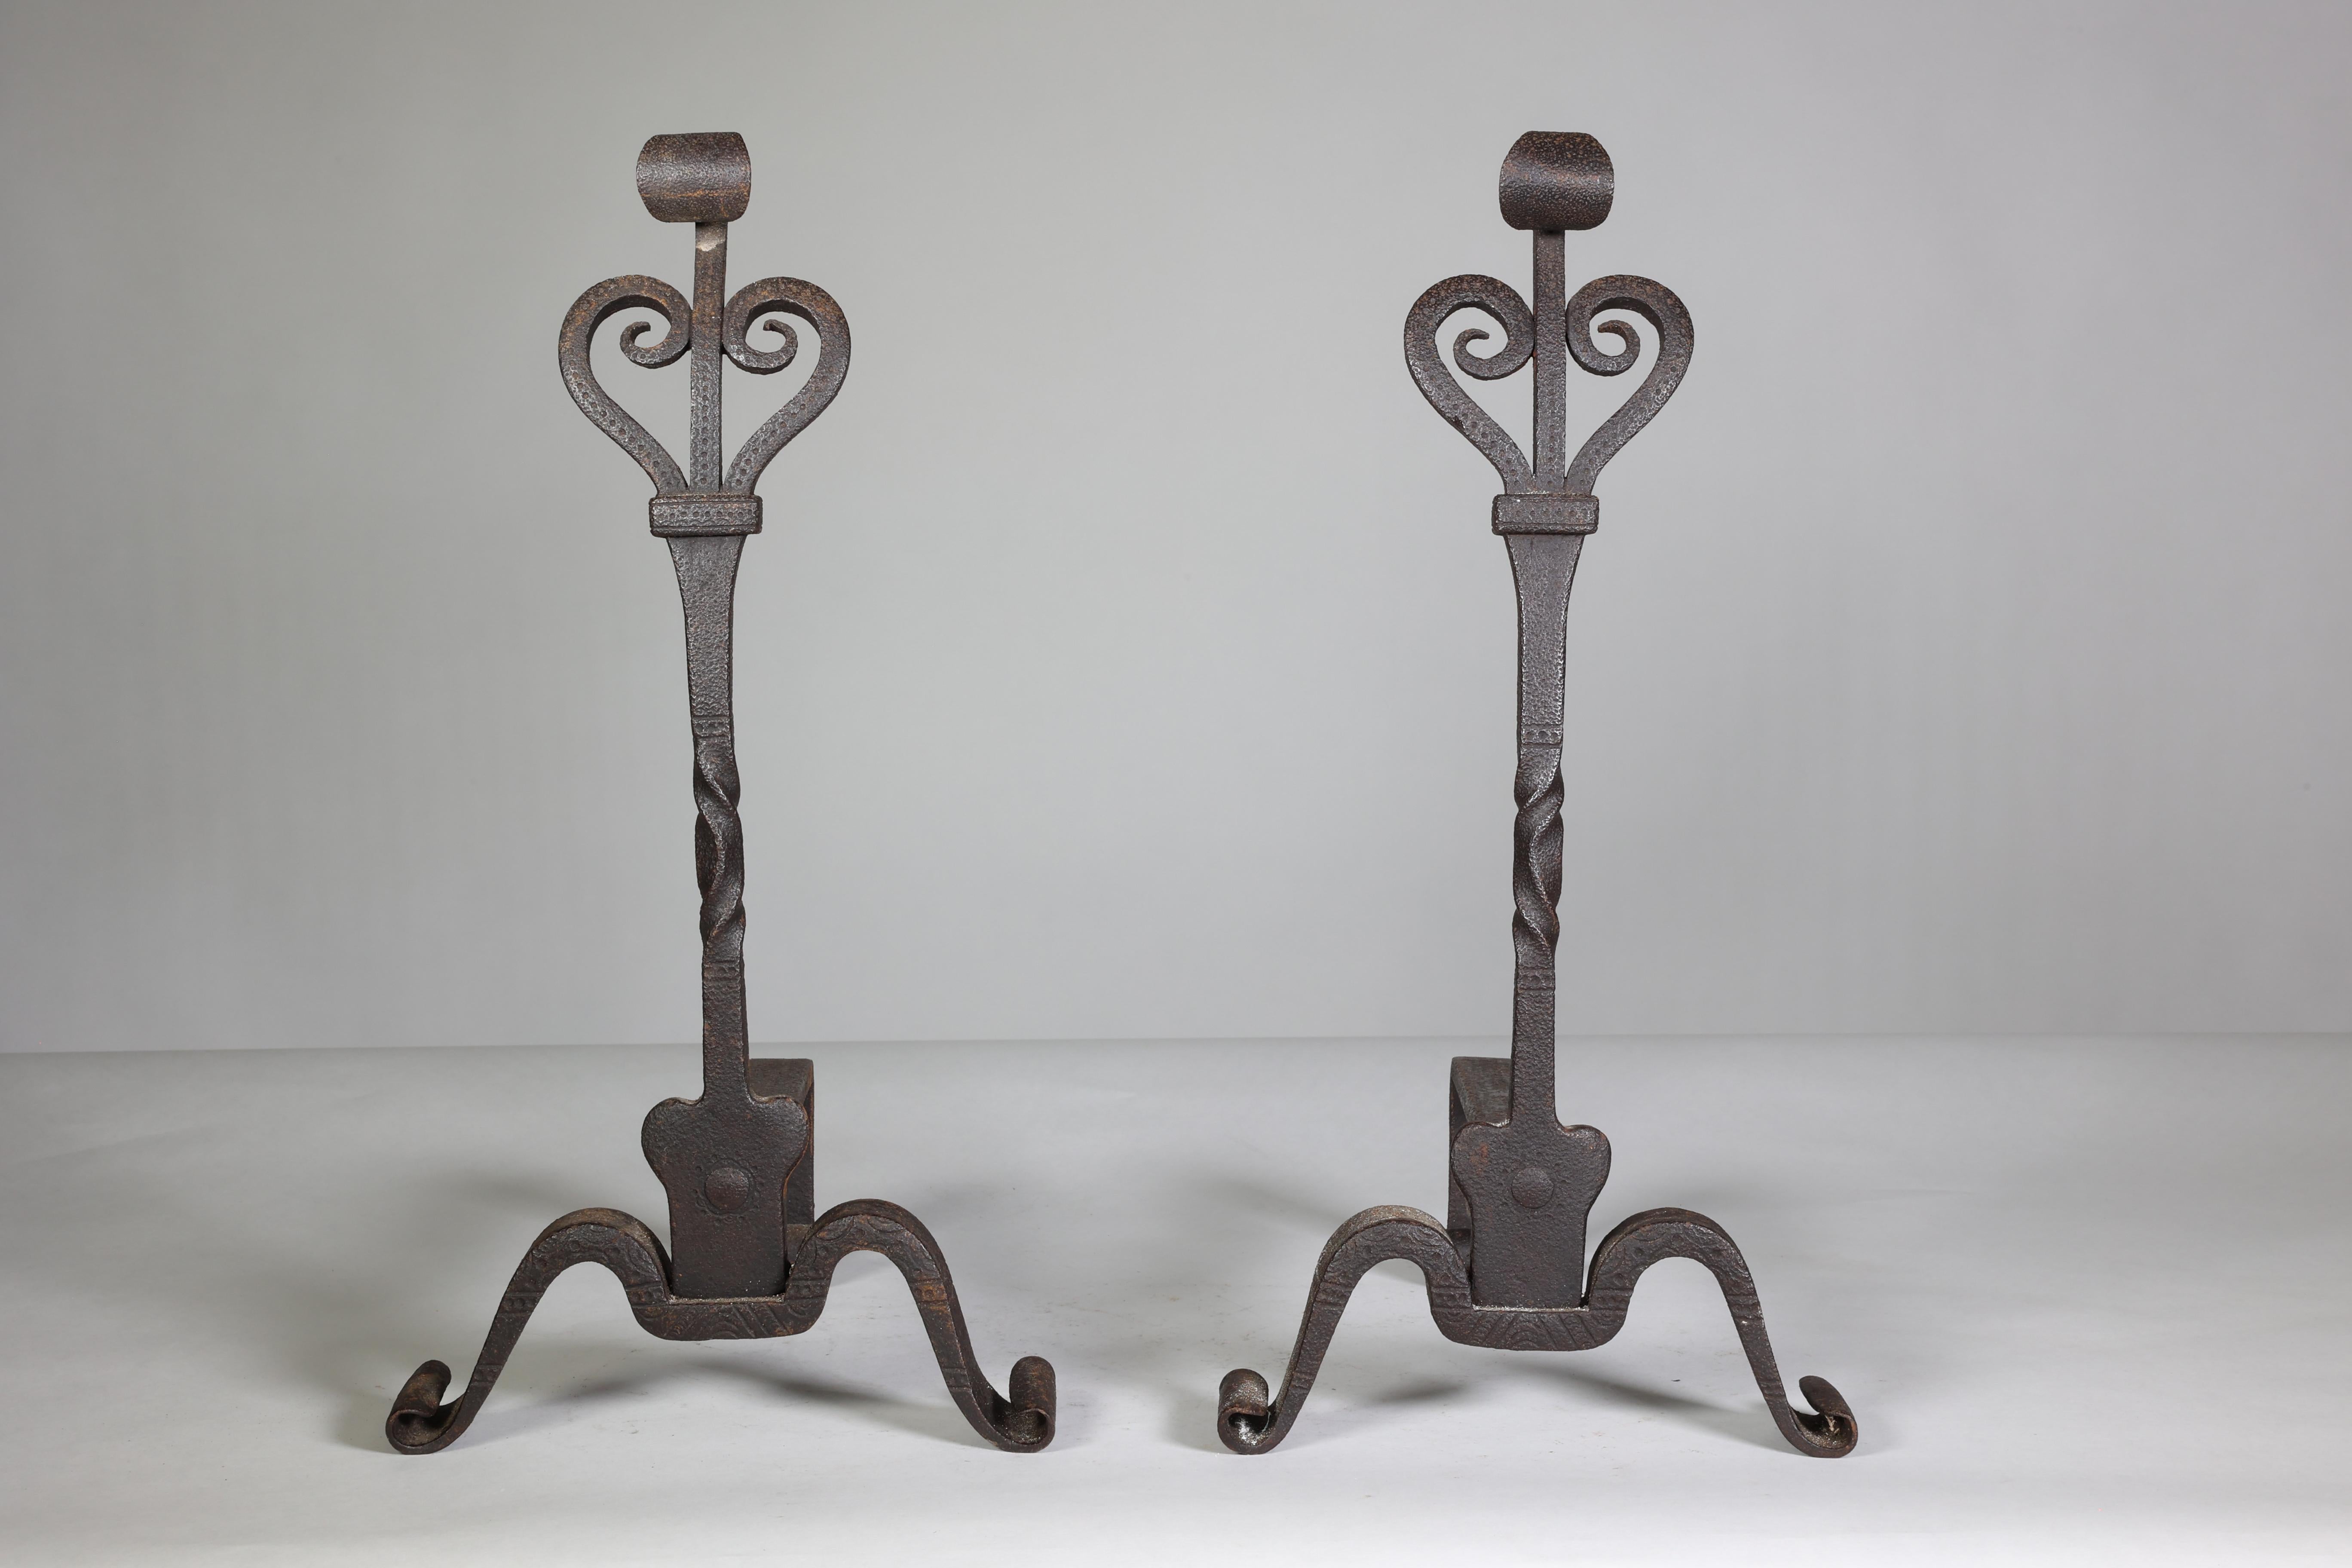 Thornton and Downer attributed. A pair of Arts and Crafts Cotswold School hand-made steel fire dogs with scroll tops and fine decorative chasing.